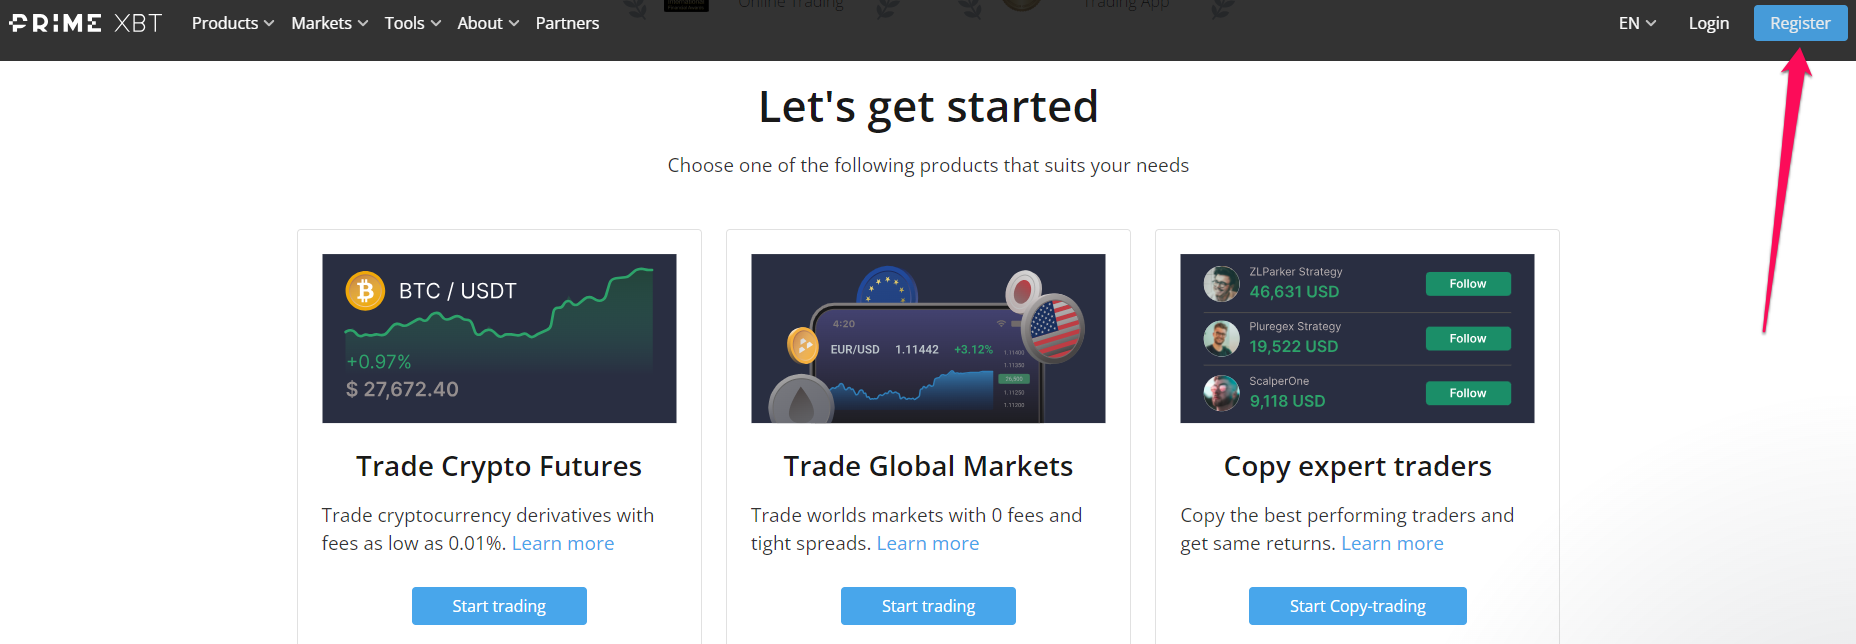 Top 3 Ways To Buy A Used Start Trading With PrimeXBT